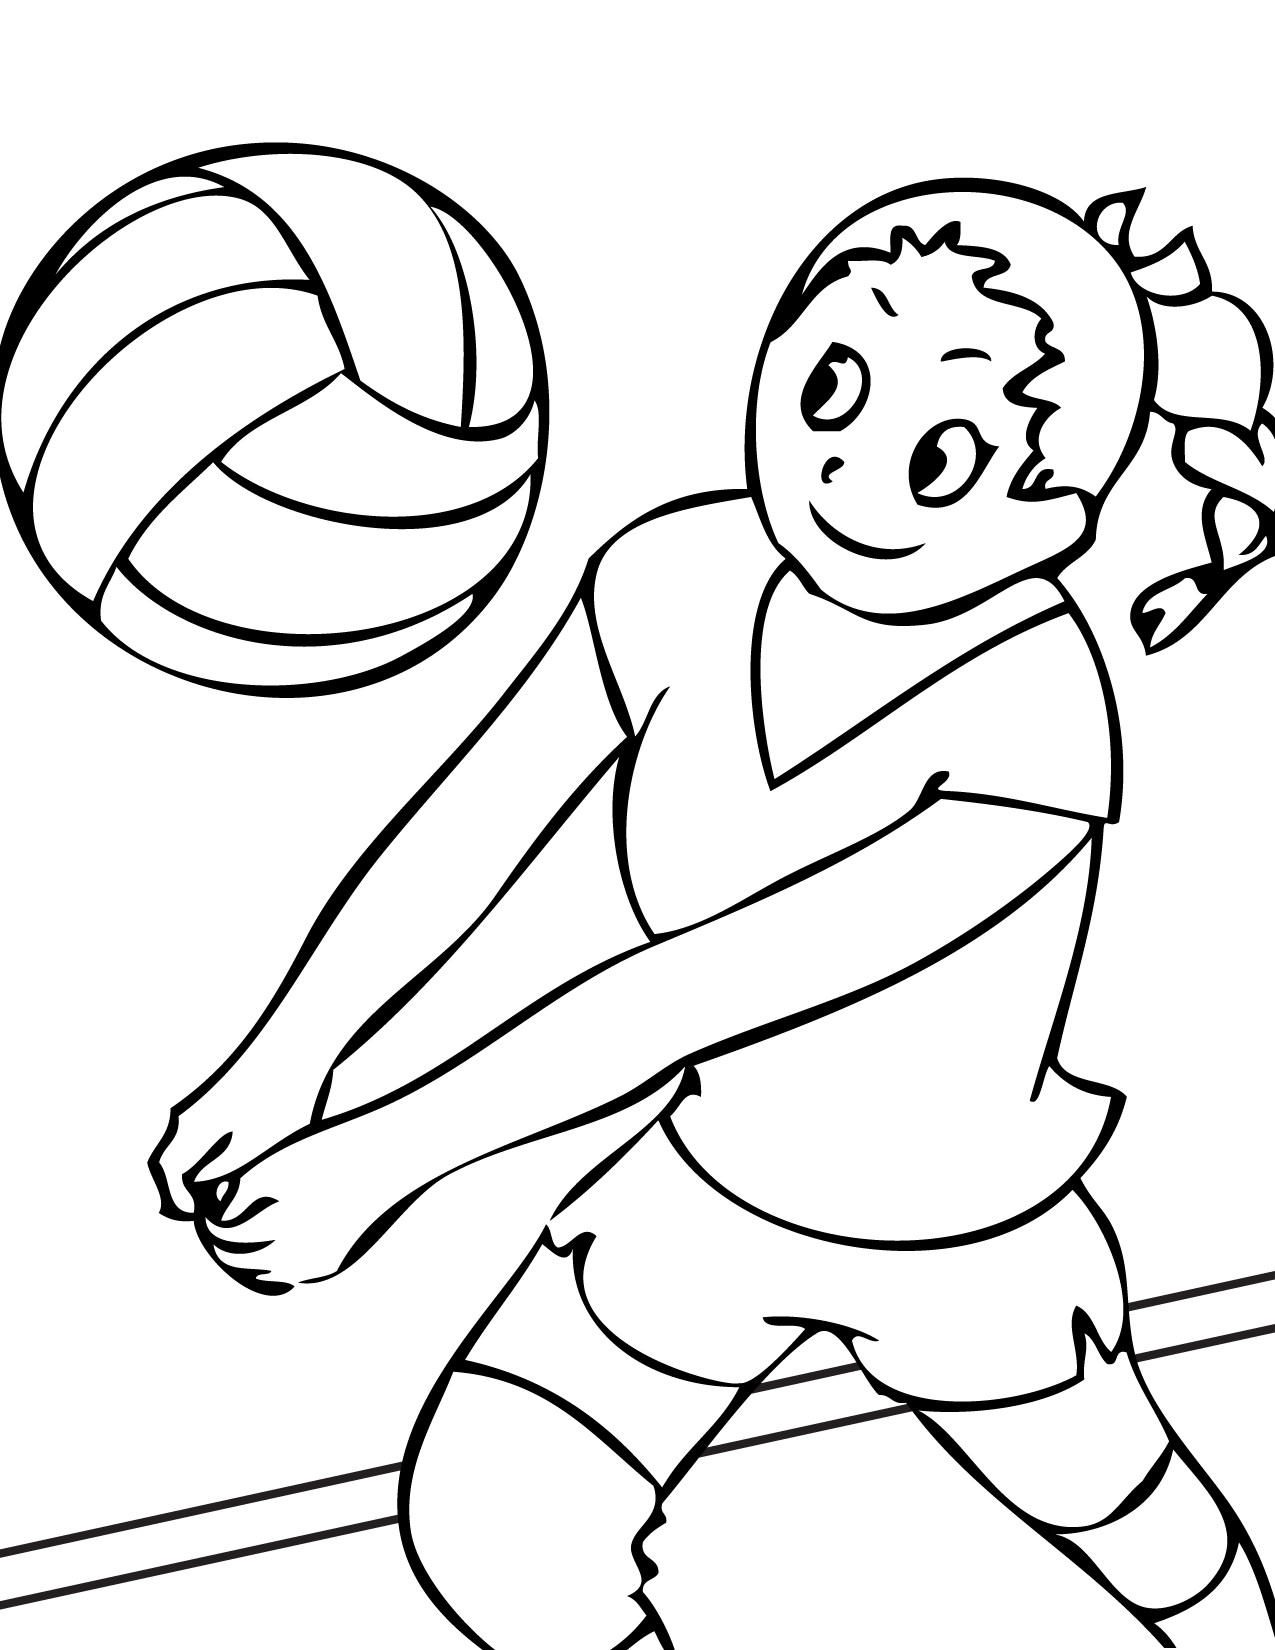 Girls Sports Coloring Pages
 Seasonal Colouring Pages Winter Sports Coloring Pages